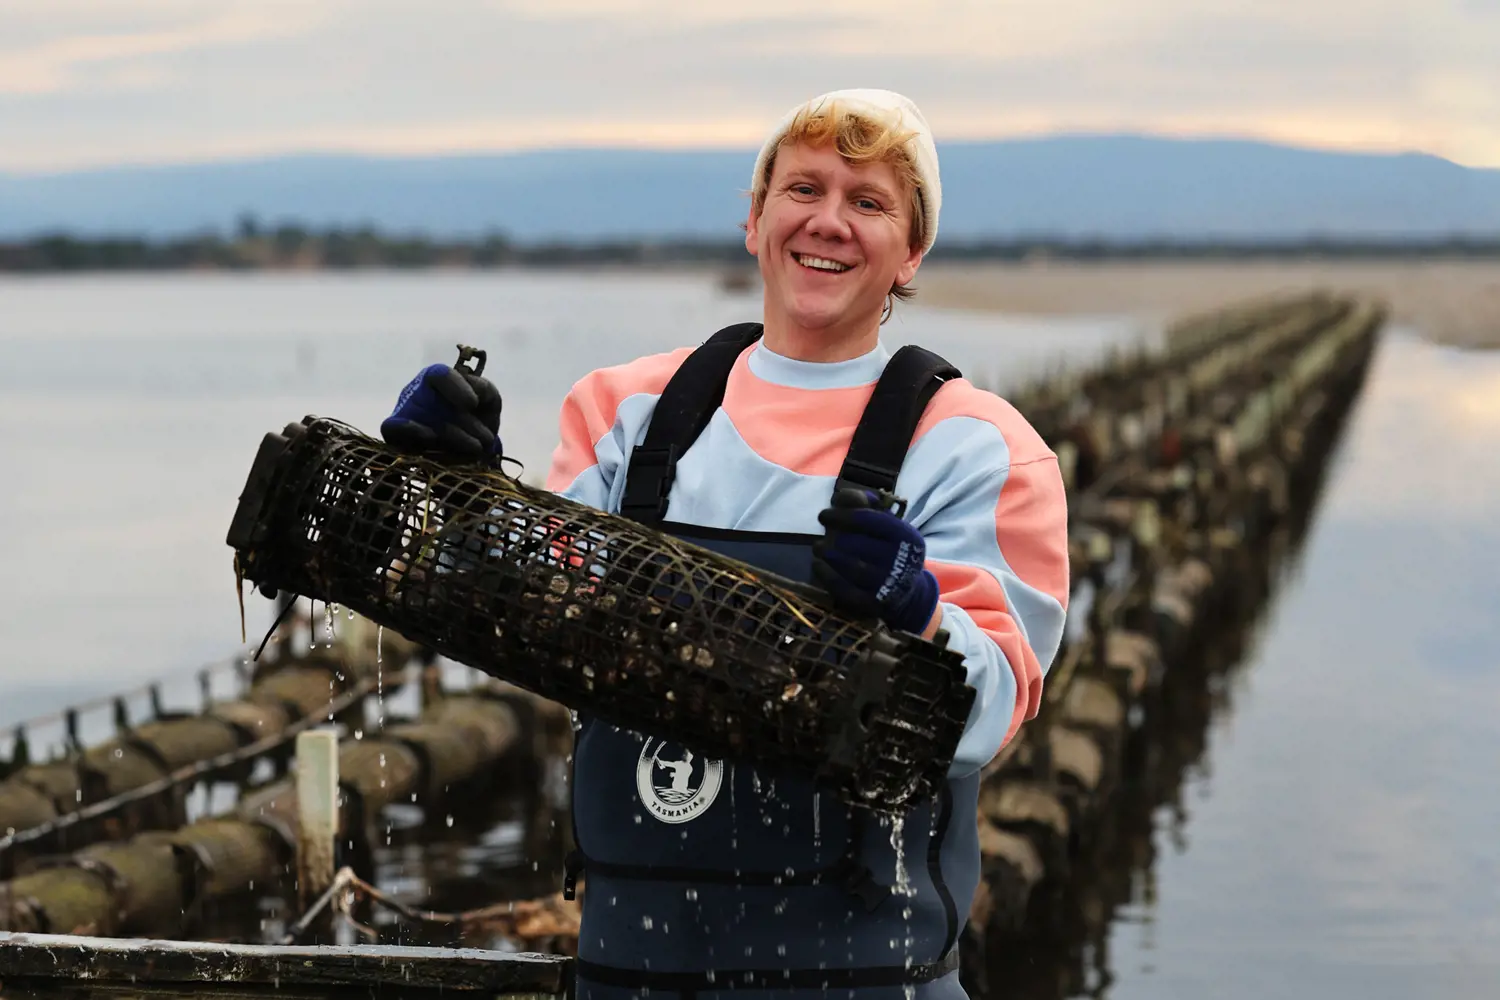 A man stands in water next to a line of oyster nest. He is wearing waterproof- waders and a beany.